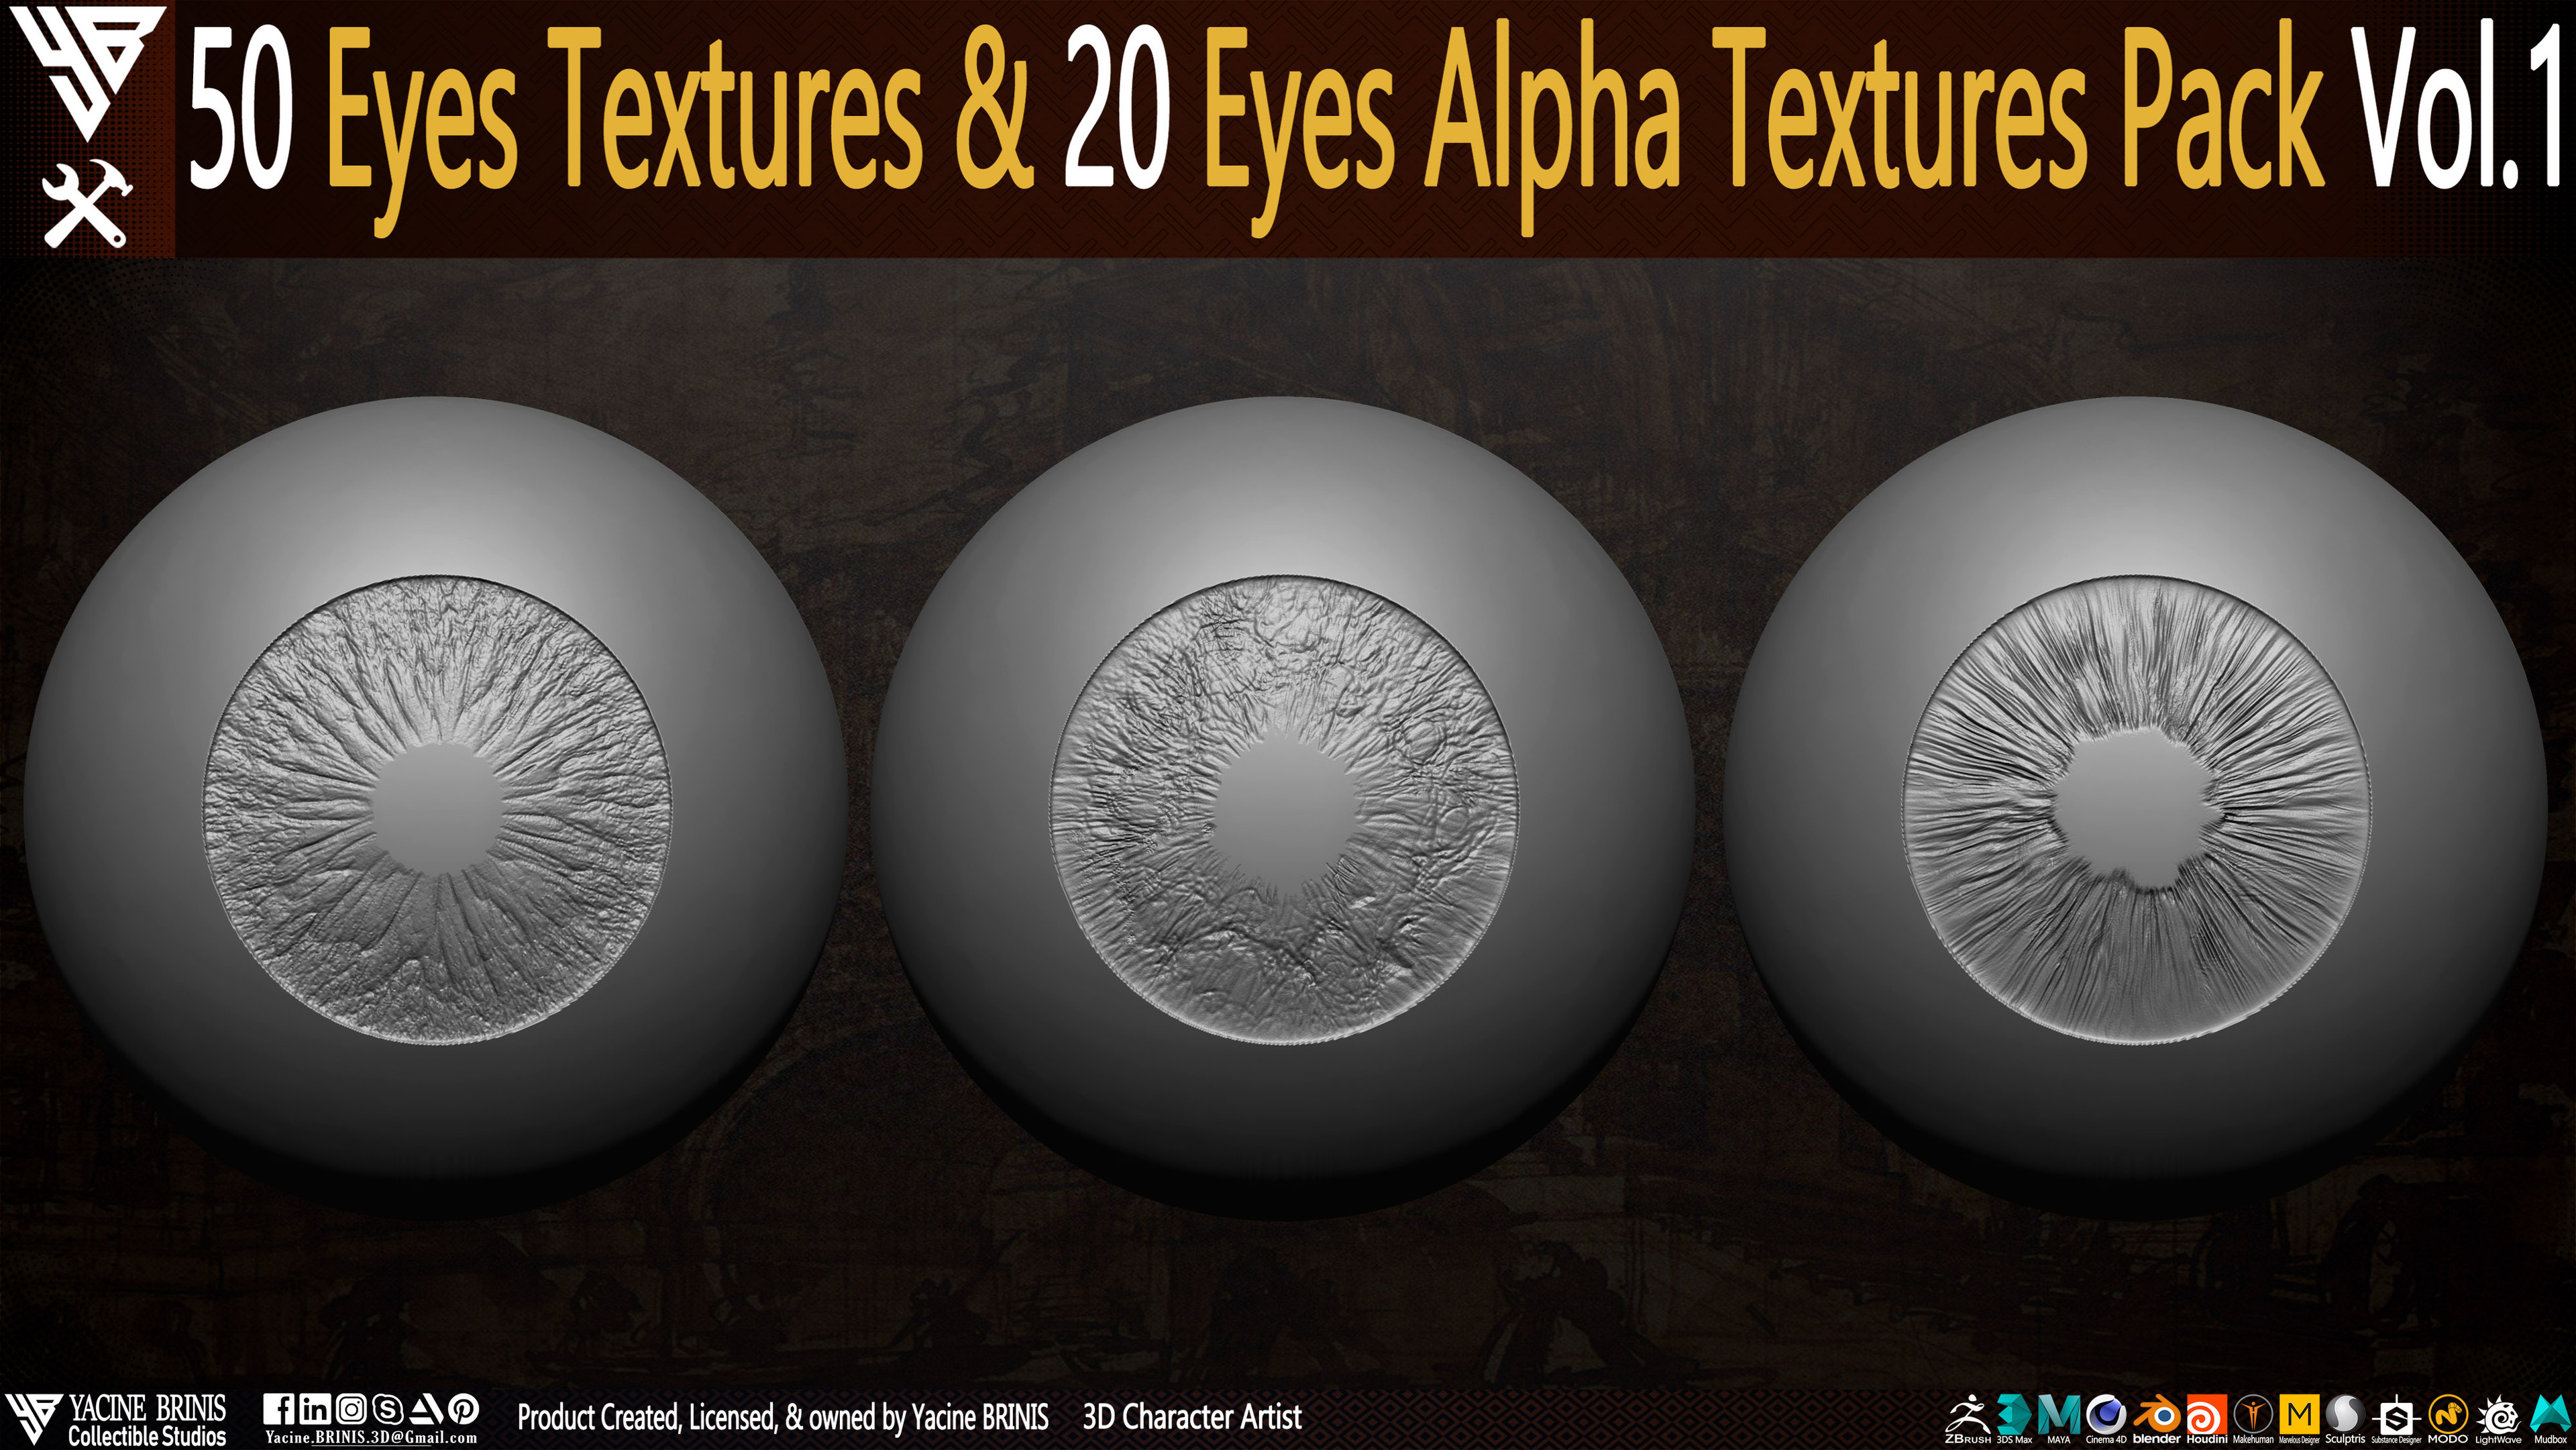 50 Eyes Textures and 20 Eyes Alpha Textures Pack Vol 01 sculpted by Yacine BRINIS Set 04